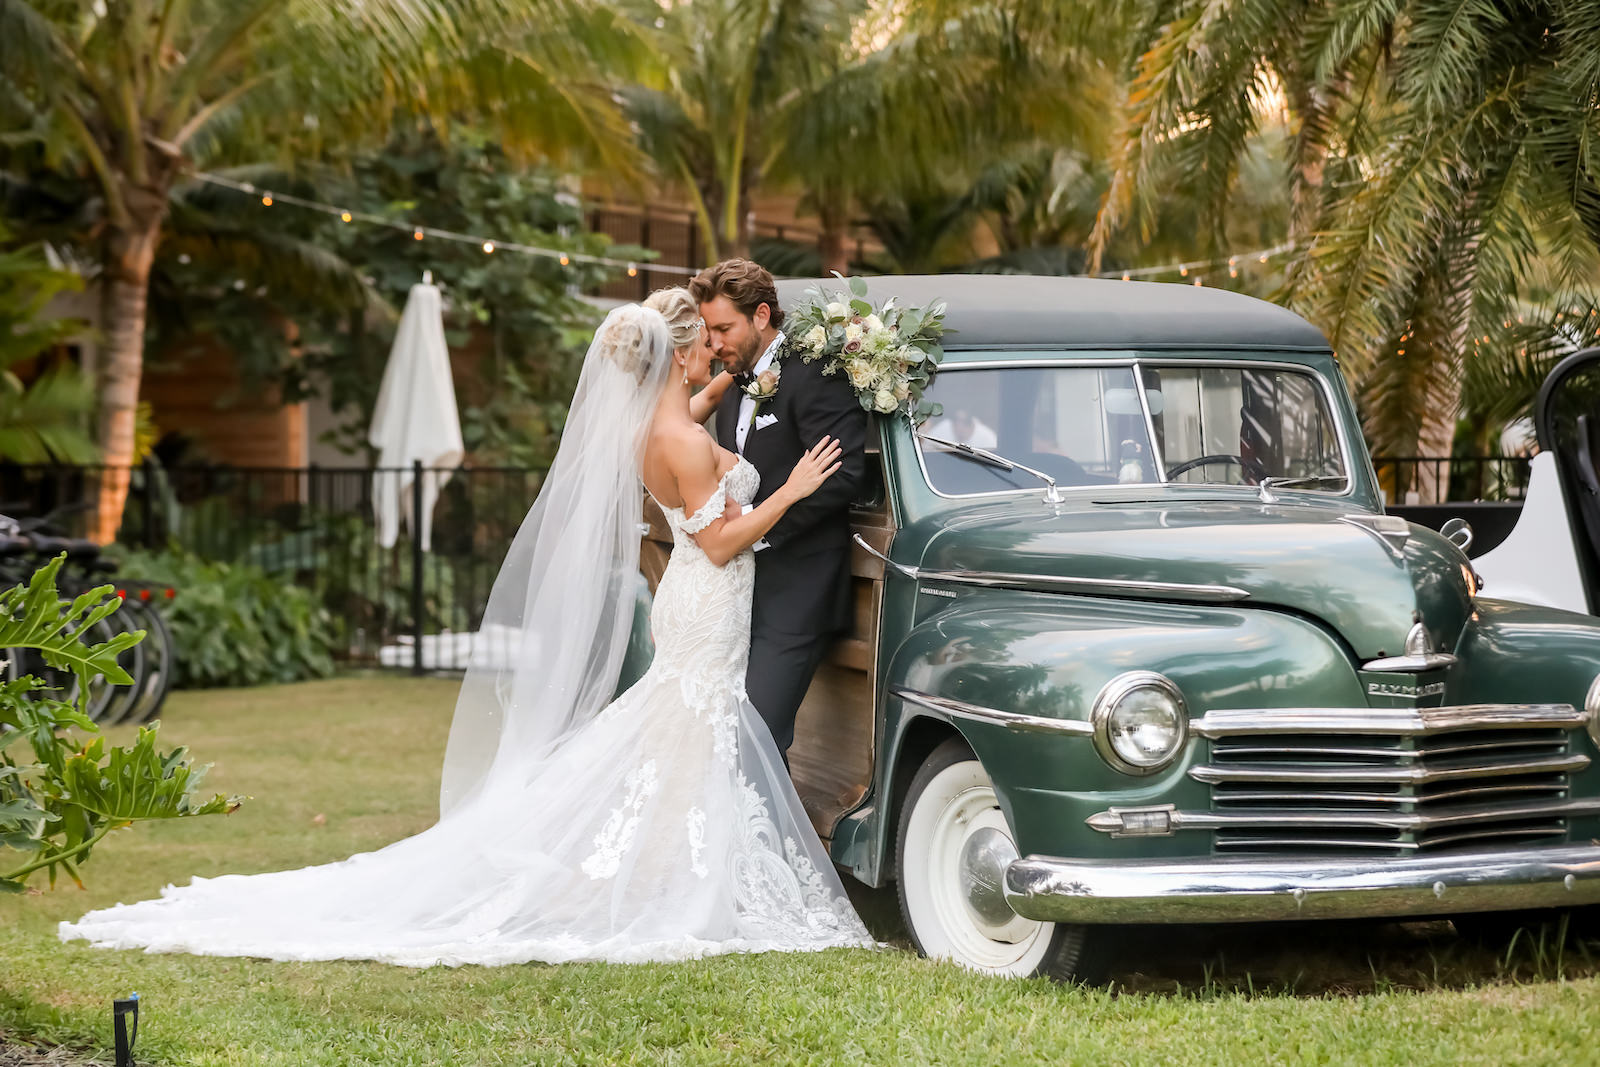 Elegant Sarasota Bride and Groom With Vintage Car at Anna Marie Island Courtyard Wedding | Bride Wearing White Fit and Flare Wedding Dress with Off the Shoulder Lace Sleeves, Holding Lush Ivory Floral Bouquet with Greenery, Groom in Classic Black Tuxedo | Florida Wedding Photographer Lifelong Photography Studio | Tampa Bay Wedding PlannerKelly Kennedy Weddings